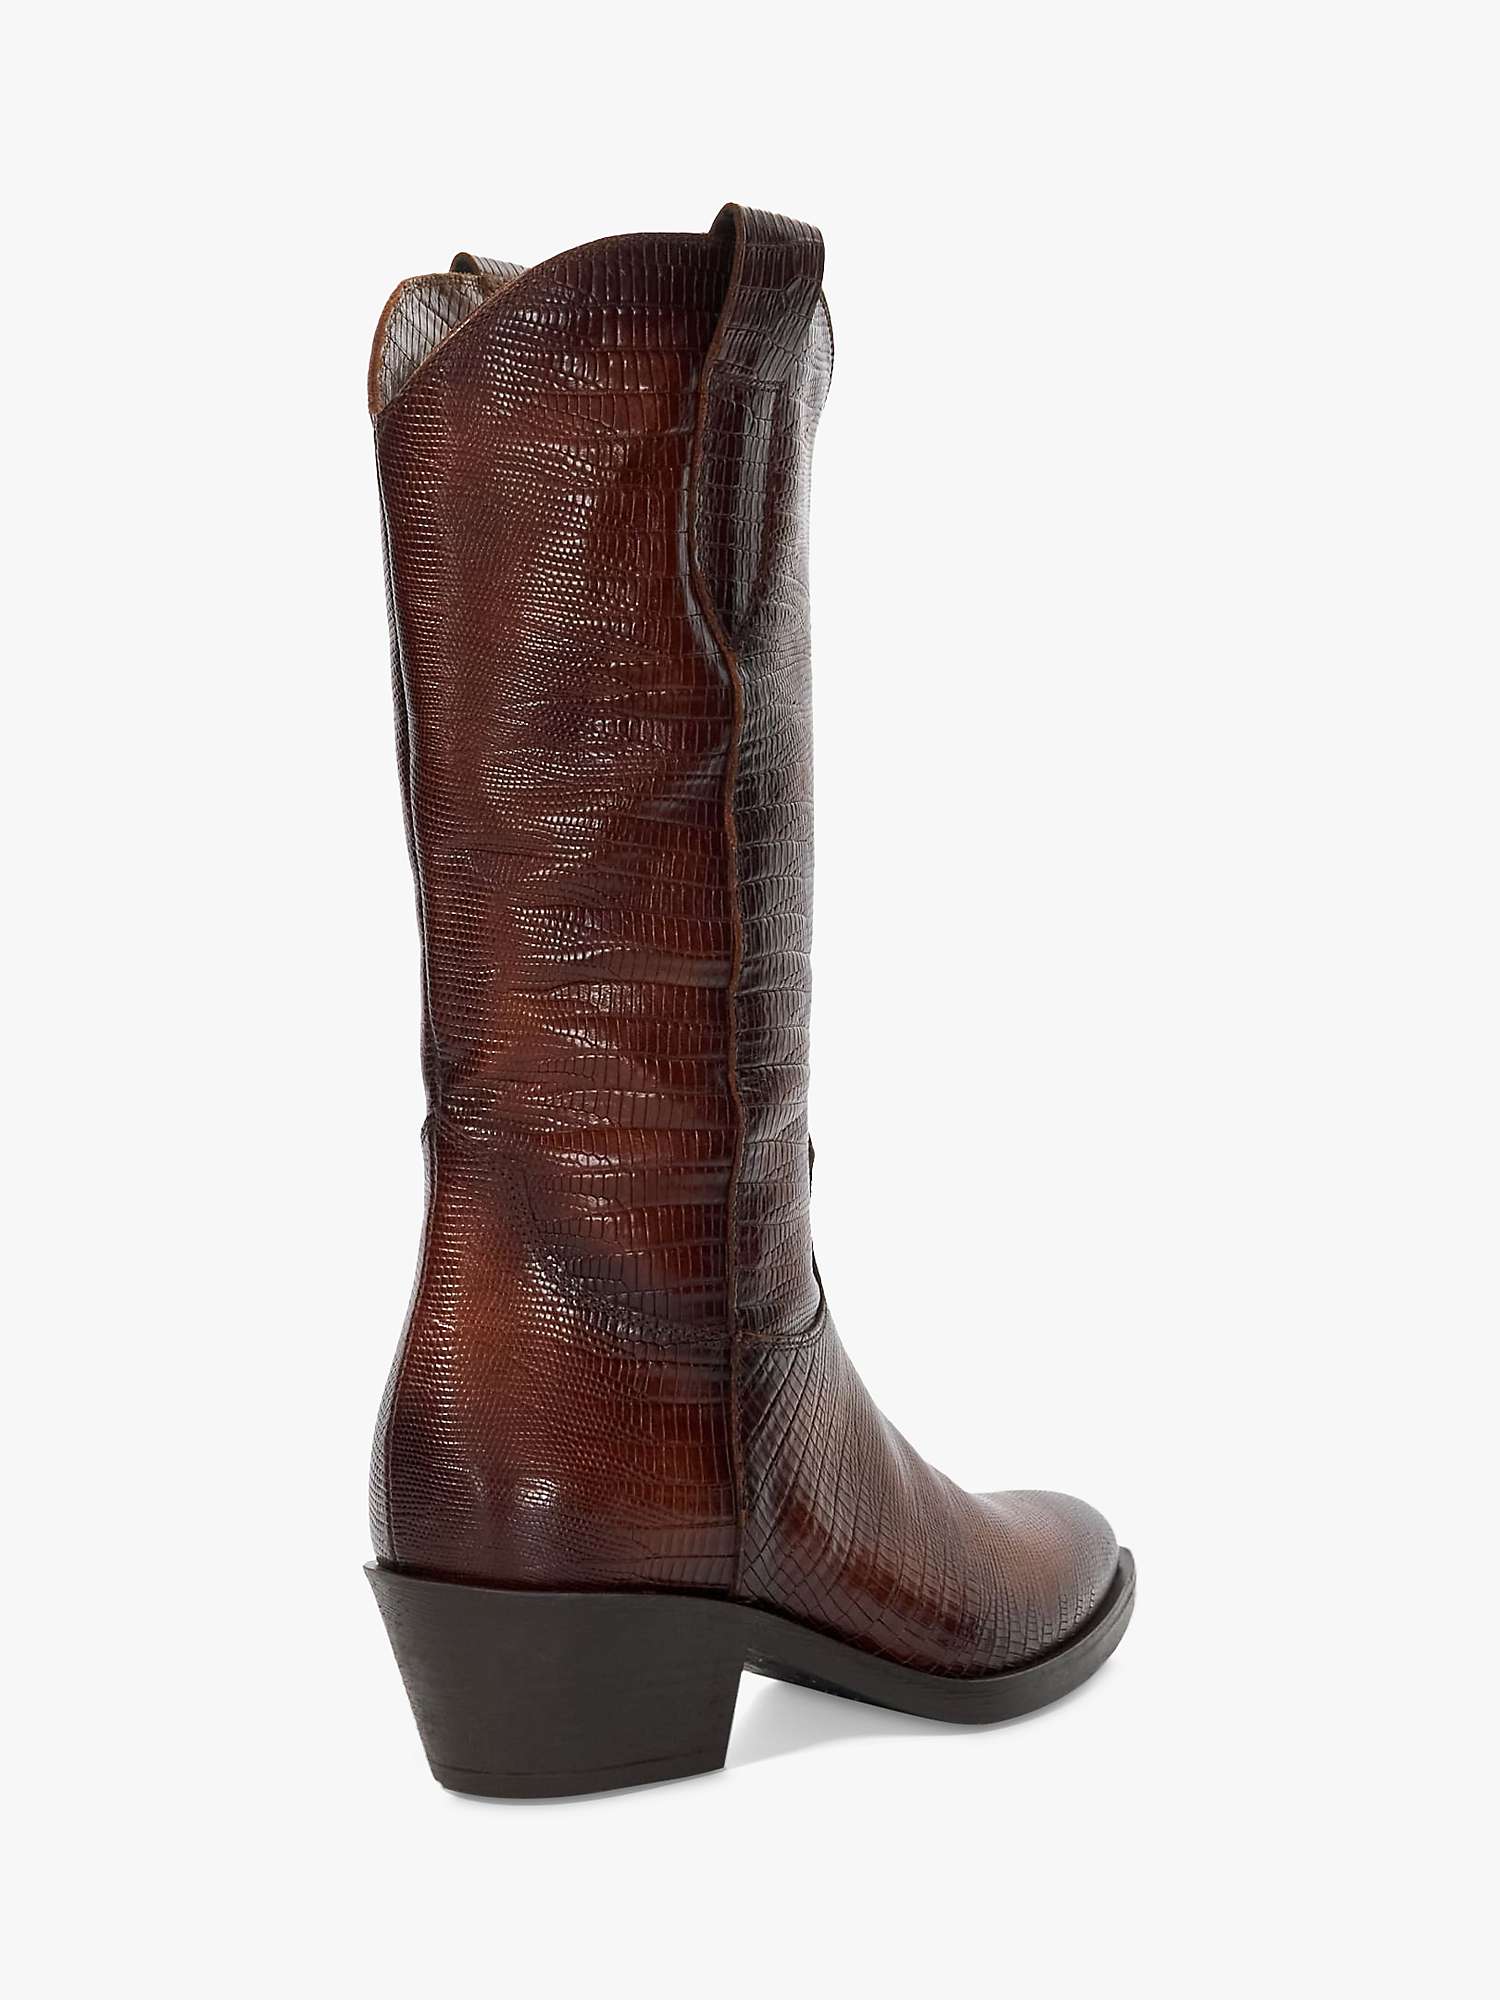 Buy Dune Tangle Reptile-Effect Leather Western Boots, Brown Online at johnlewis.com